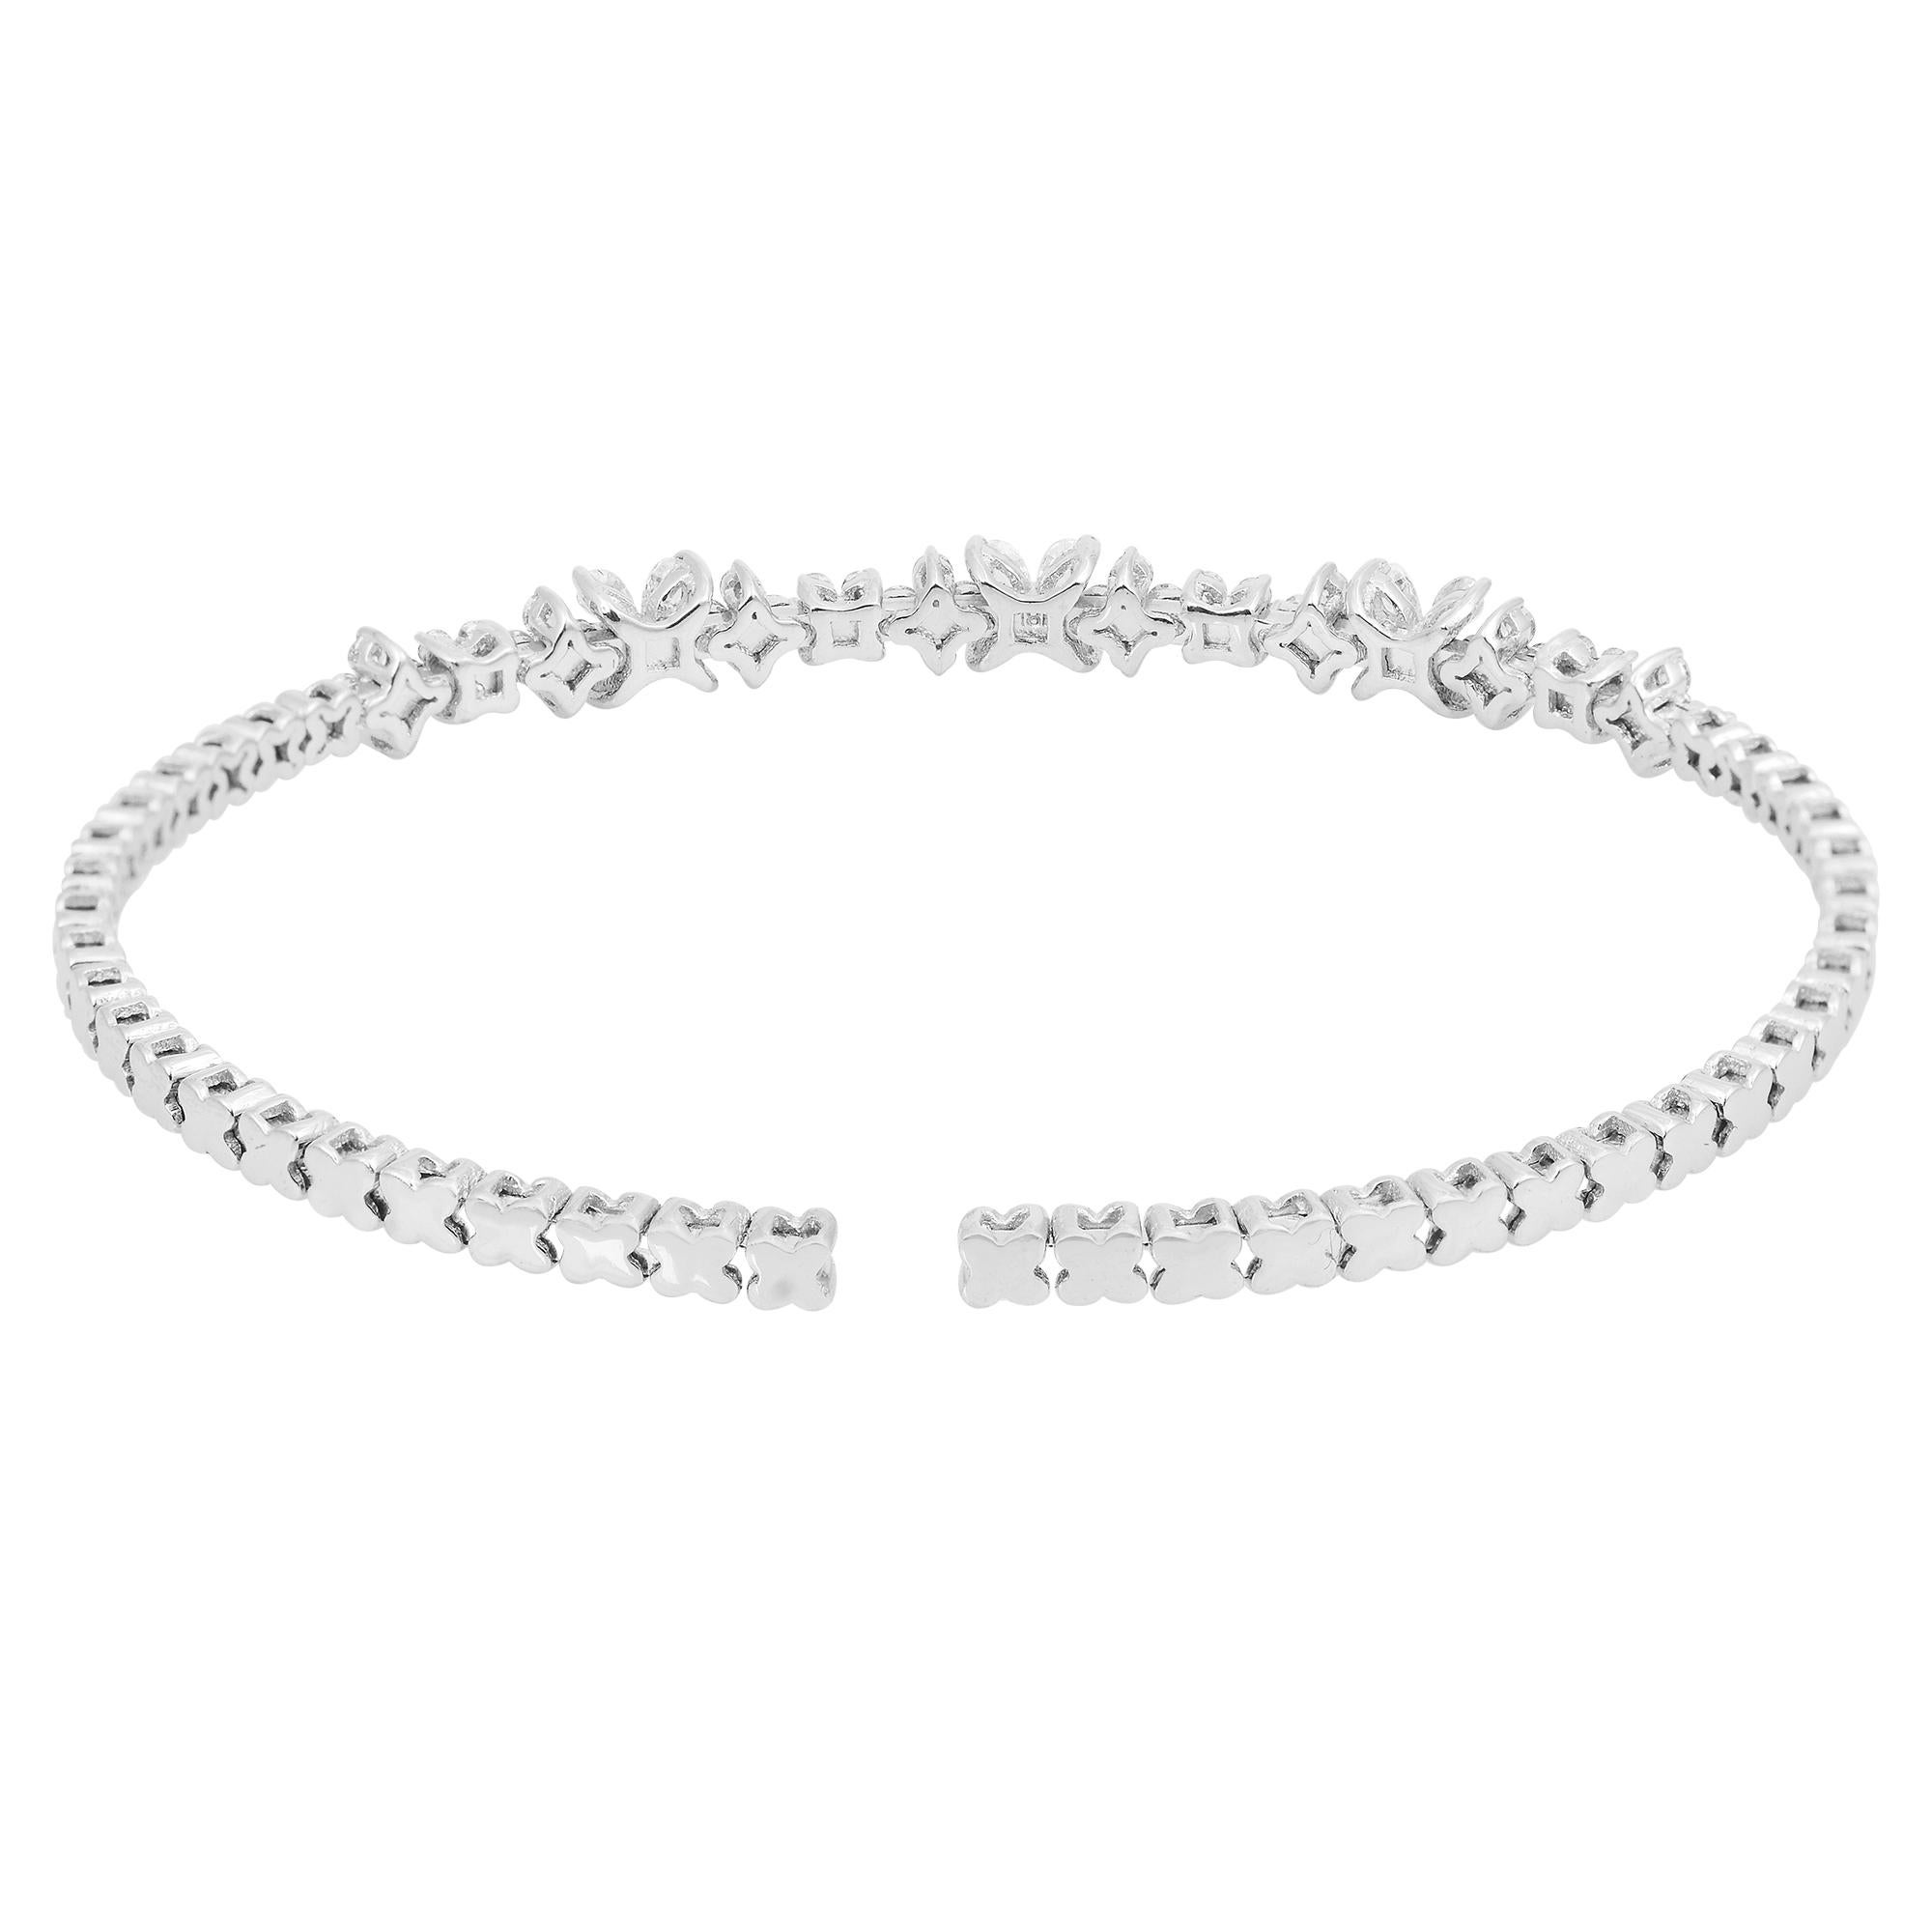 Crafted with precision and attention to detail, this bracelet exemplifies the highest standards of craftsmanship and quality. The lustrous 18 karat white gold provides the perfect backdrop for the dazzling diamonds, creating a timeless piece that